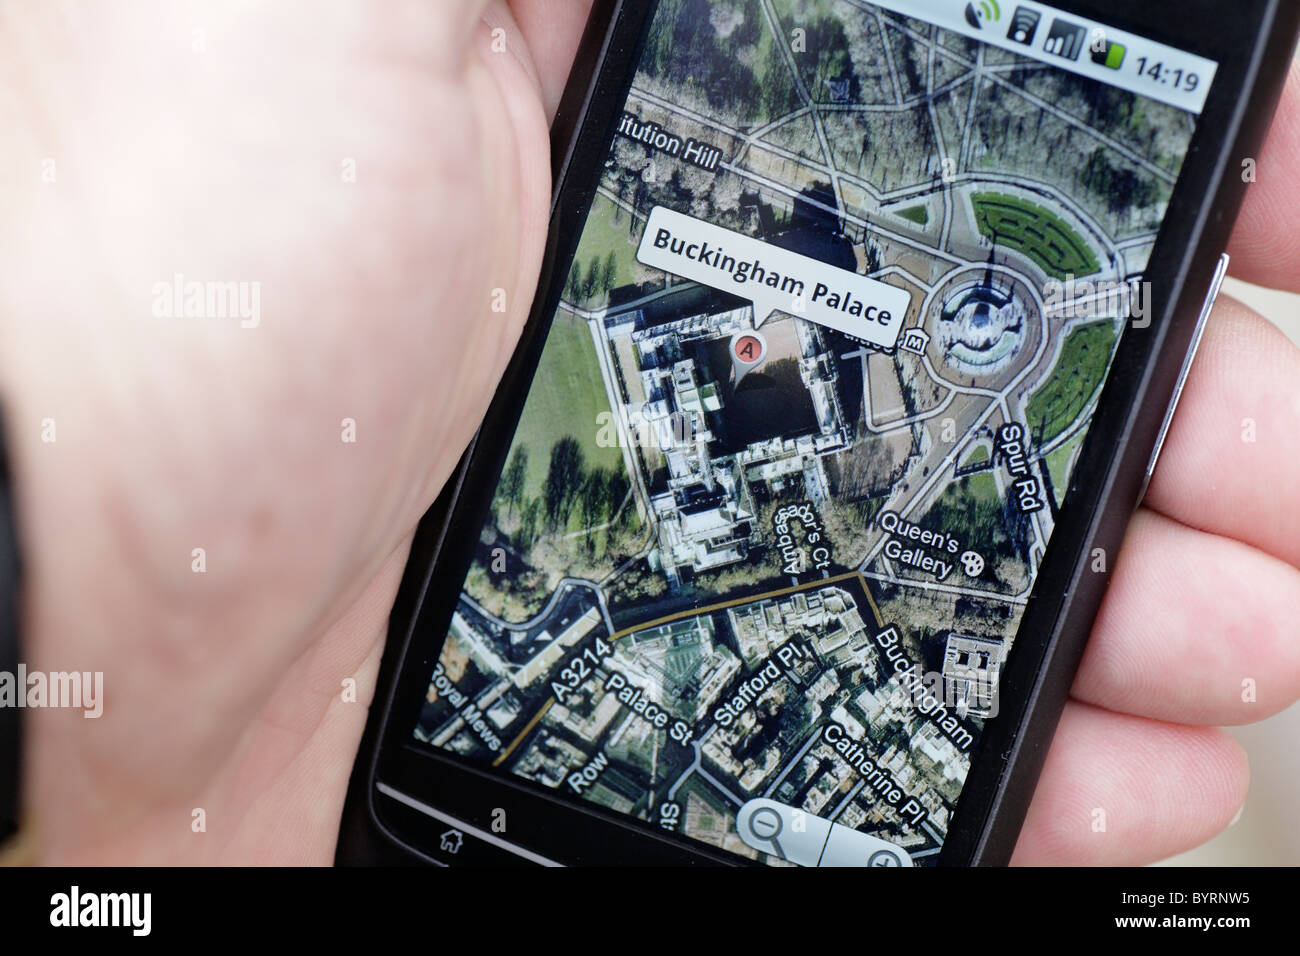 Man looking at google GPS maps map of Buckingham Palace London on a touch  screen smartphone in a wifi hotspot closeup Stock Photo - Alamy